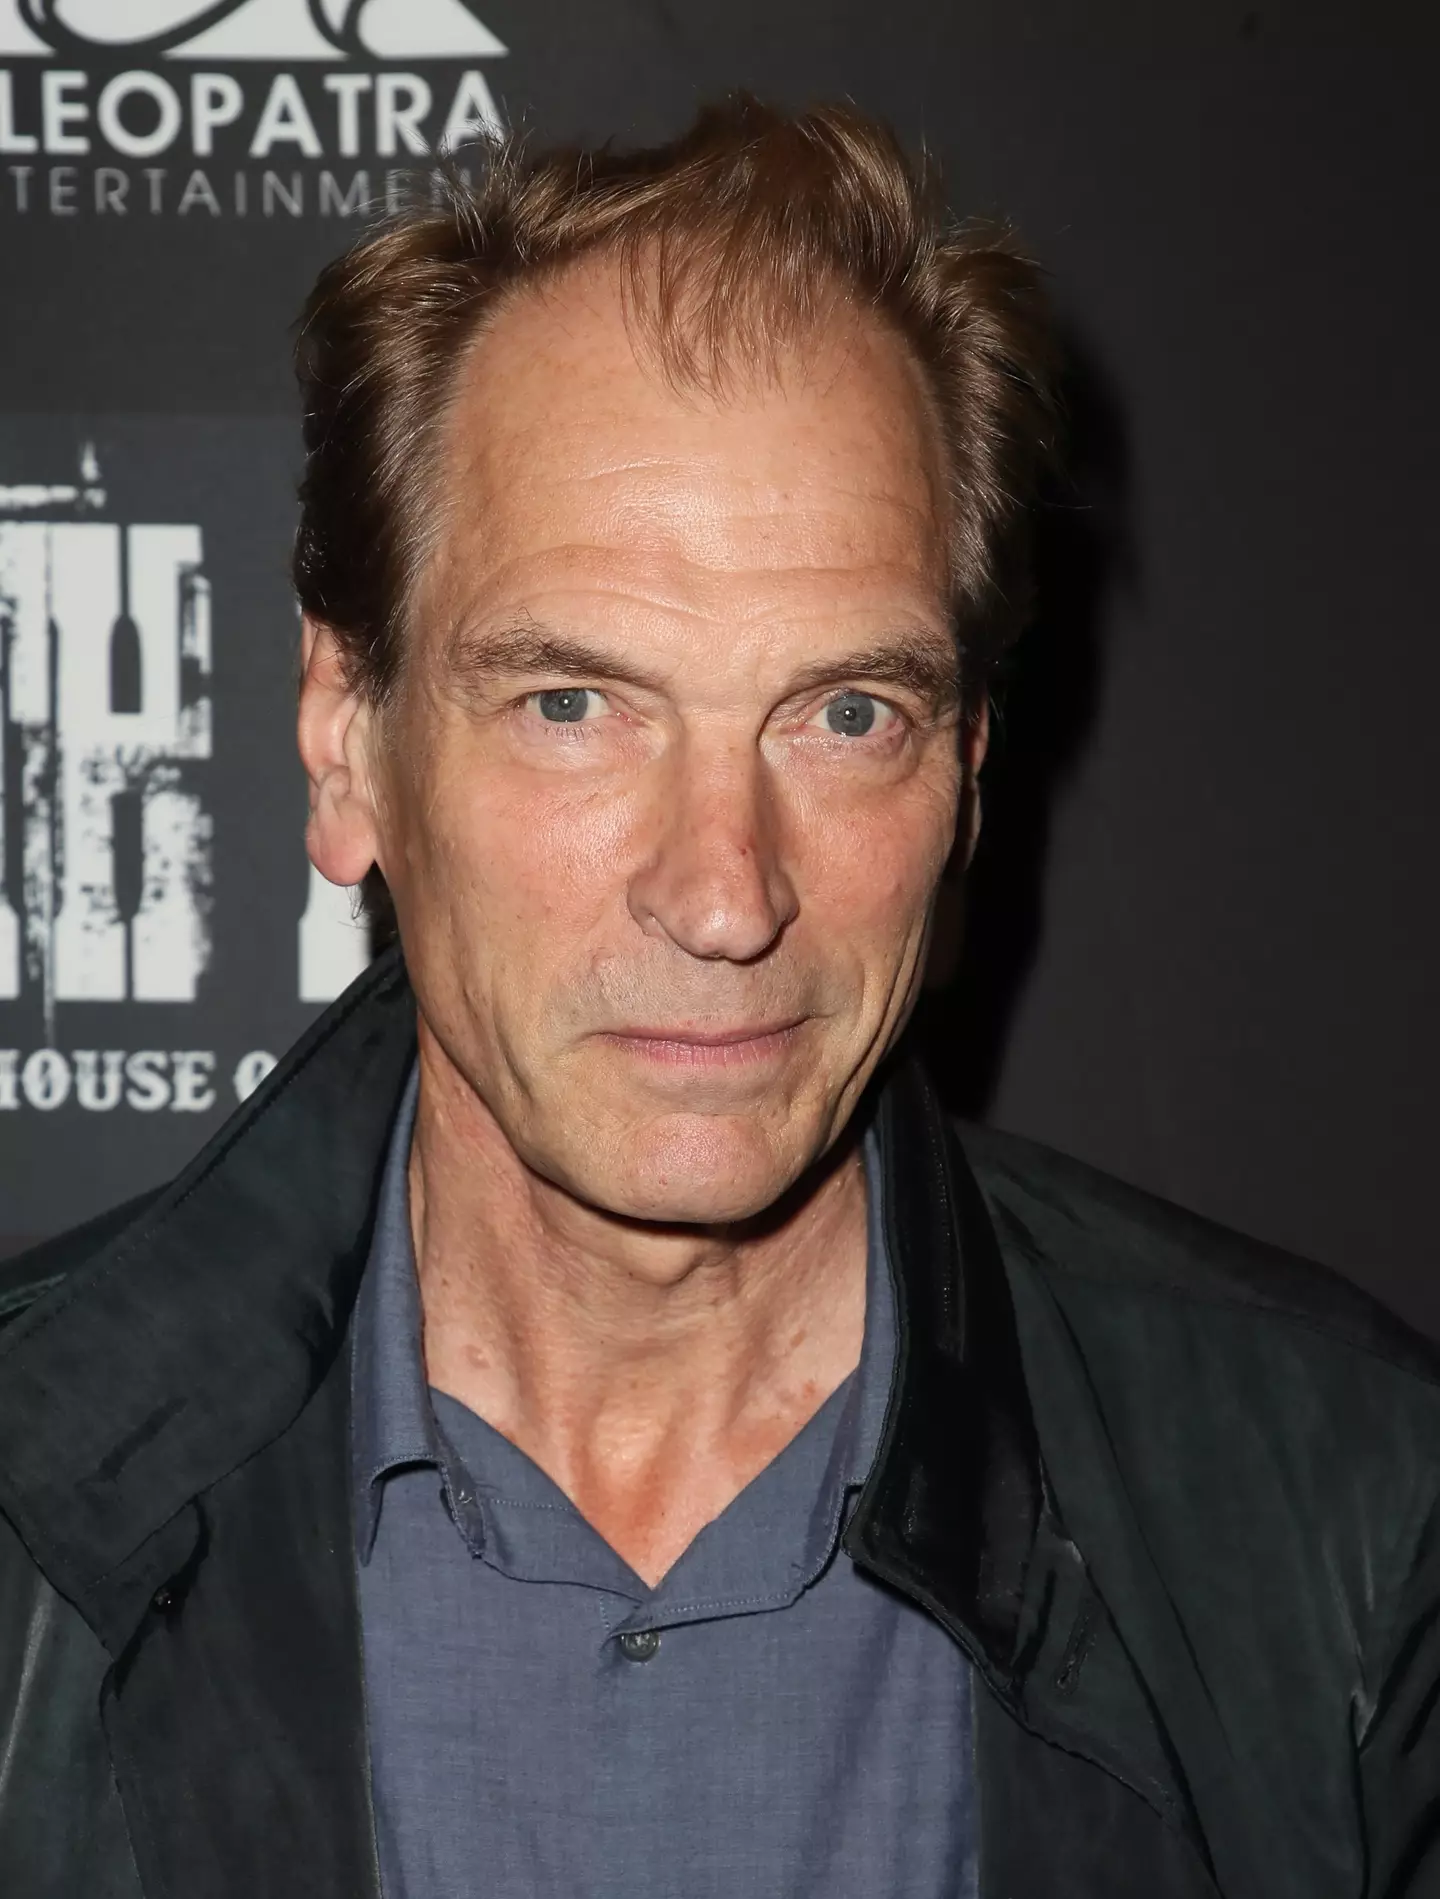 Julian Sands' cause of death is 'undetermined'.